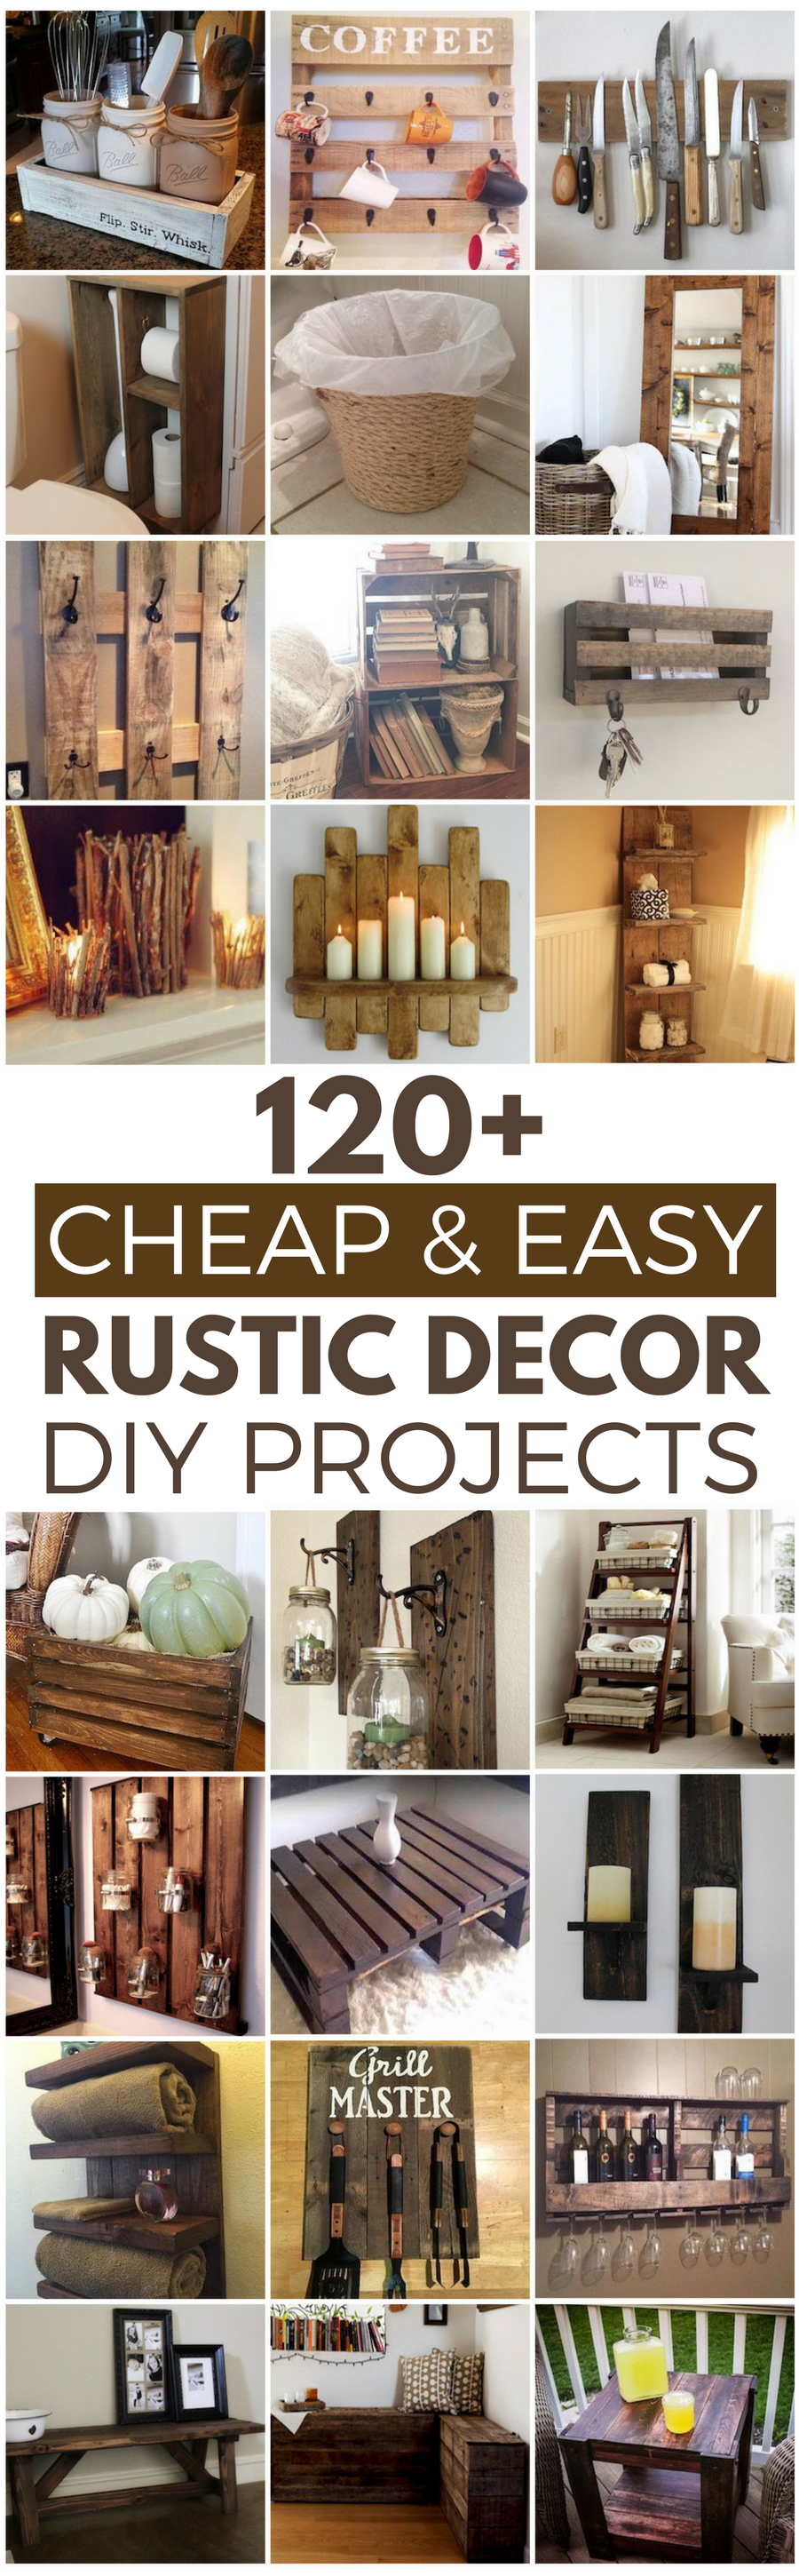 120 Cheap and Easy DIY Rustic Home Decor Ideas - Prudent Penny Pincher